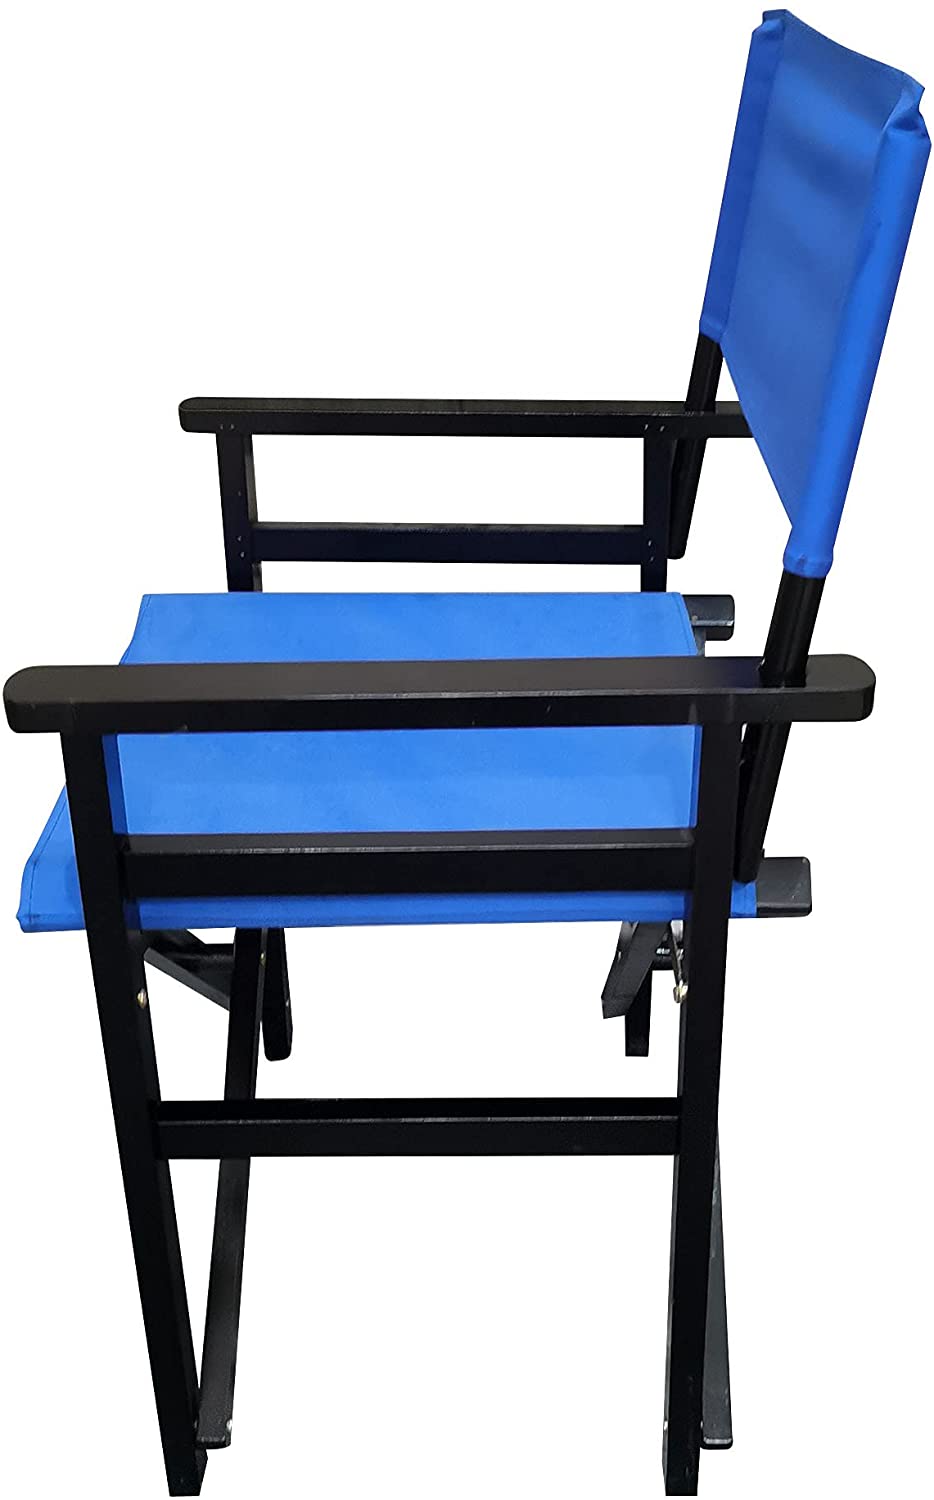 2 PCS Wooden Folding Director Chair, Outdoor Folding Wood Chair Set, Canvas Folding Chair for Balcony, Courtyard, Fishing, Camping (Blue) - image 4 of 15